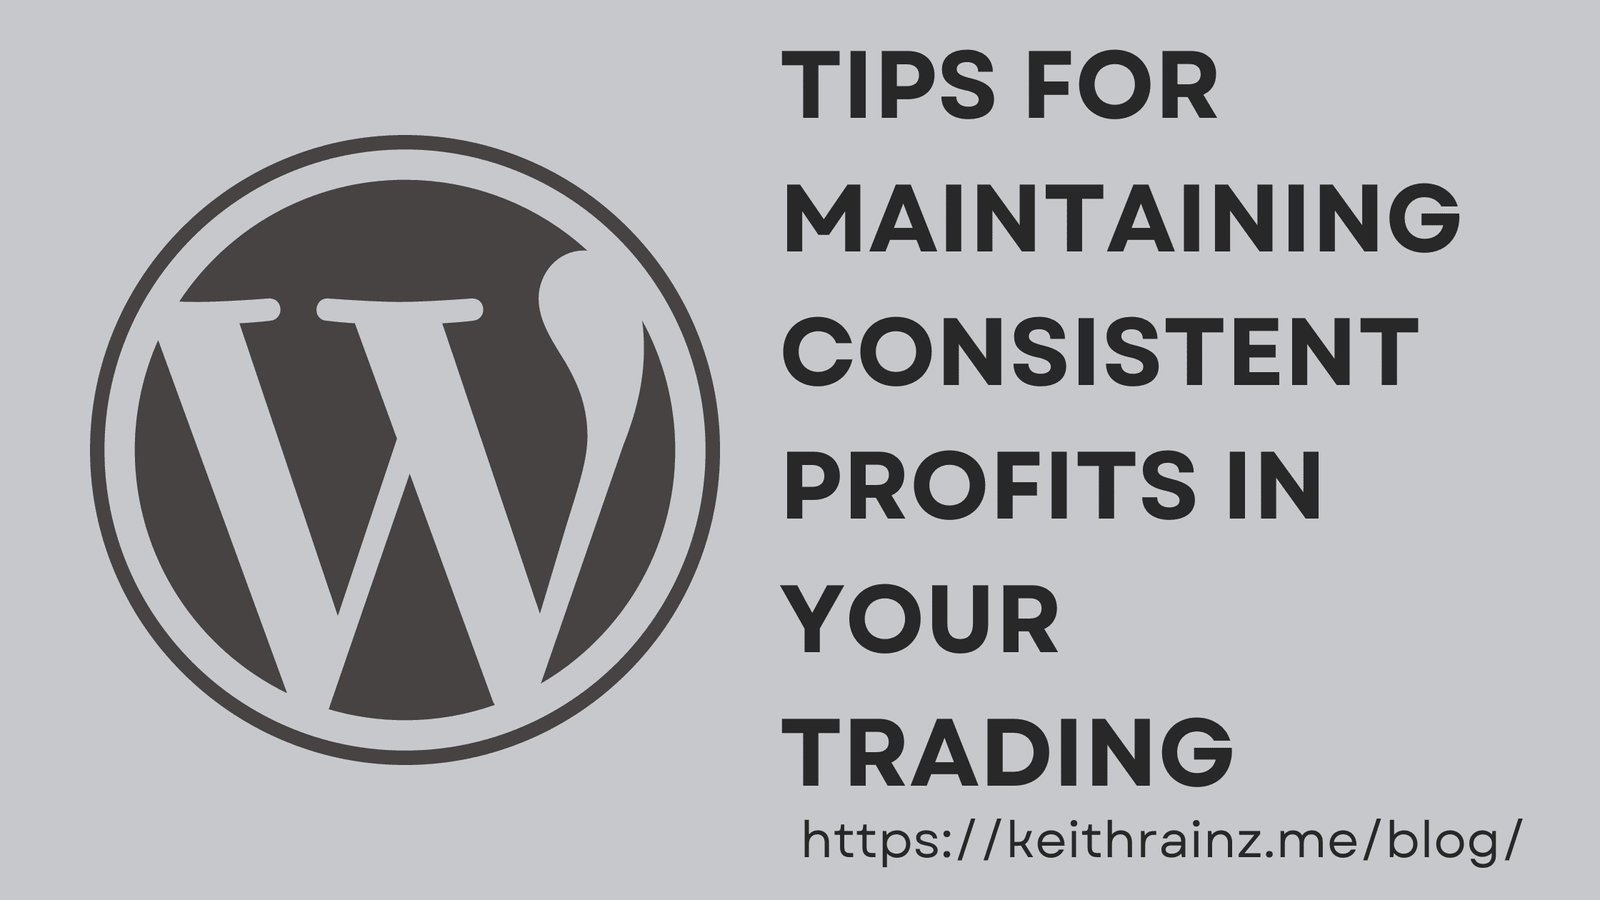 Tips for Maintaining Consistent Profits in Your Trading